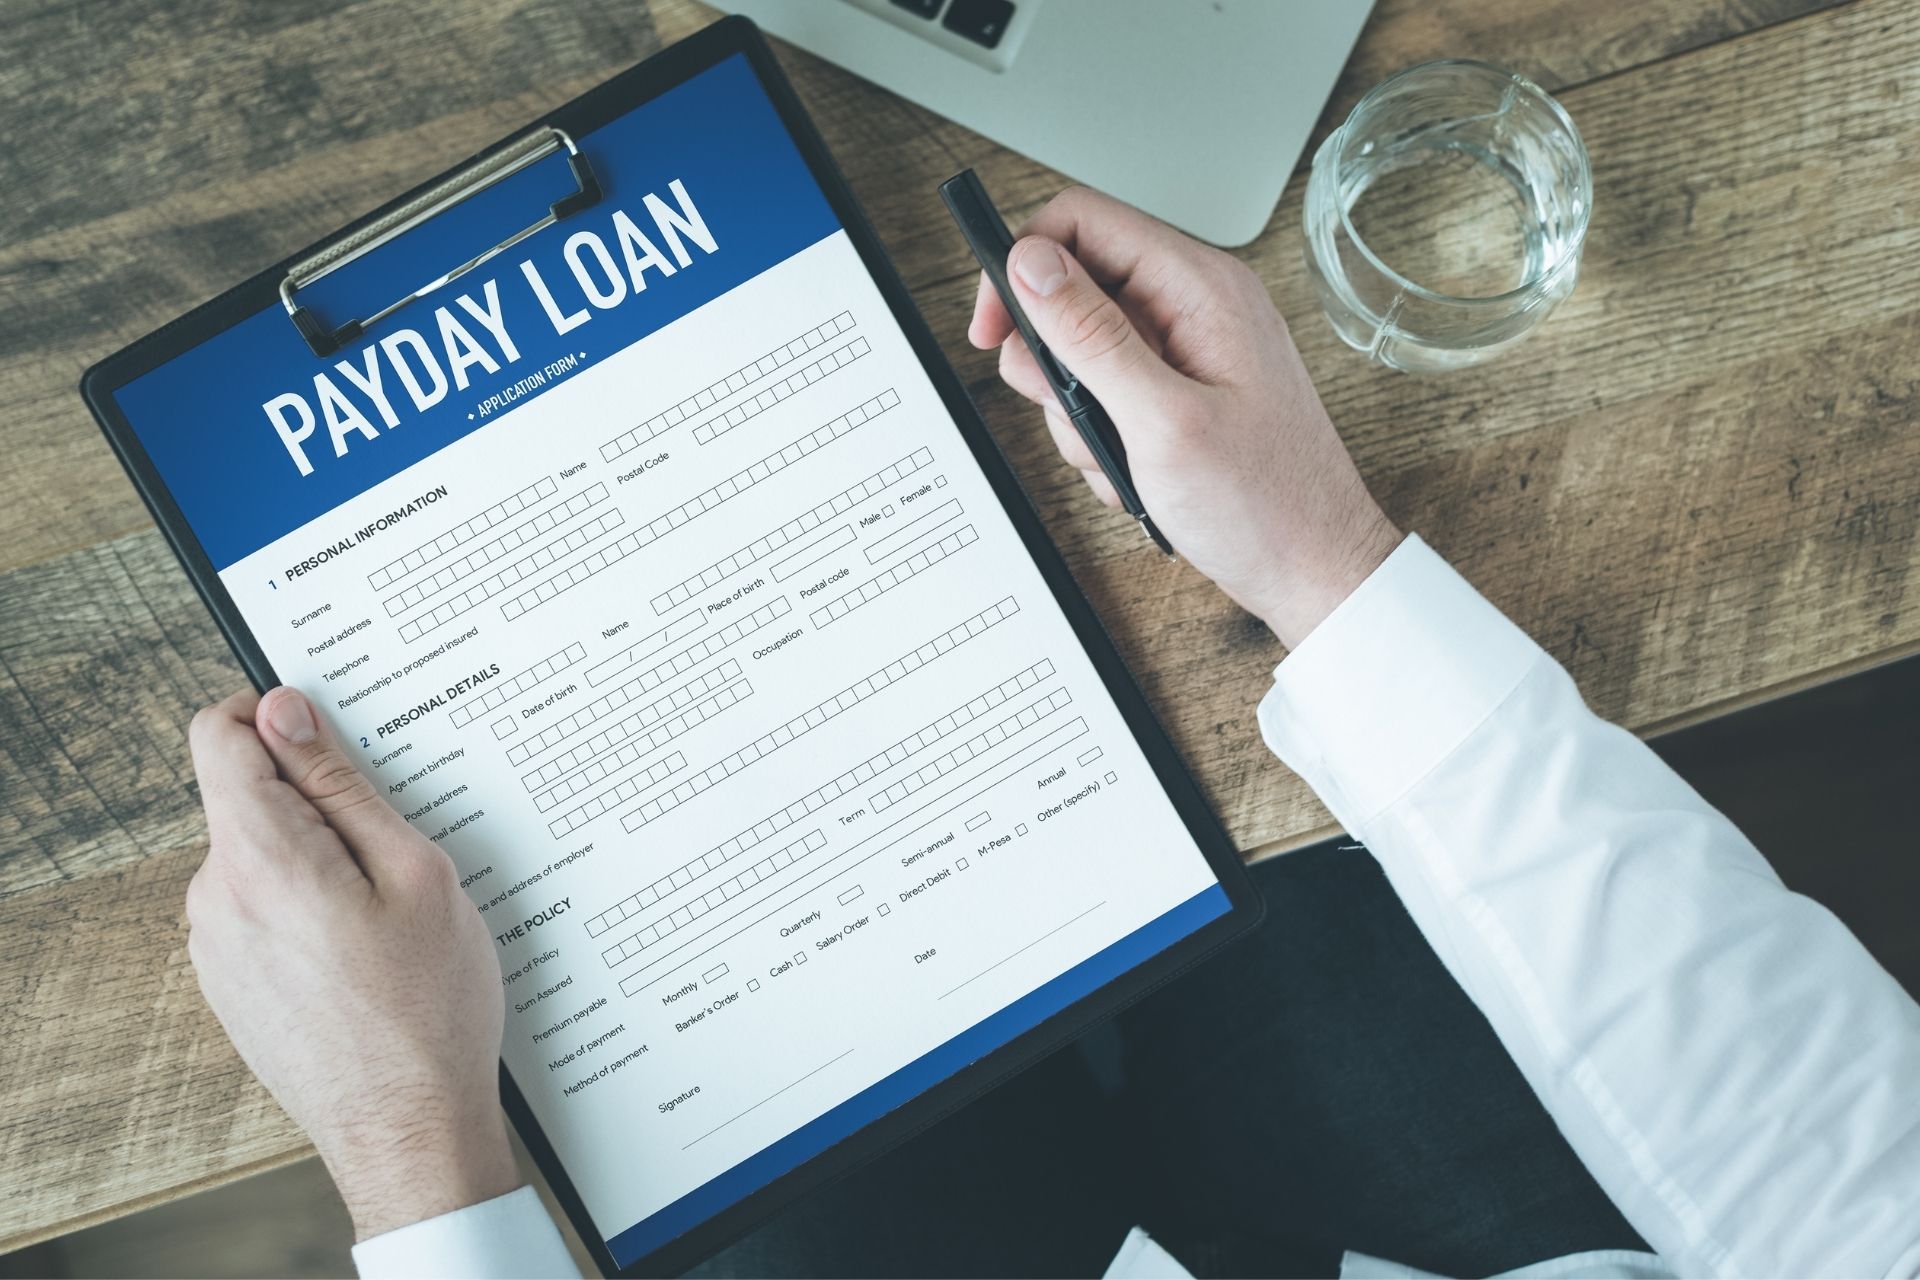 Payday loans: What do they mean? And how can I apply to them?